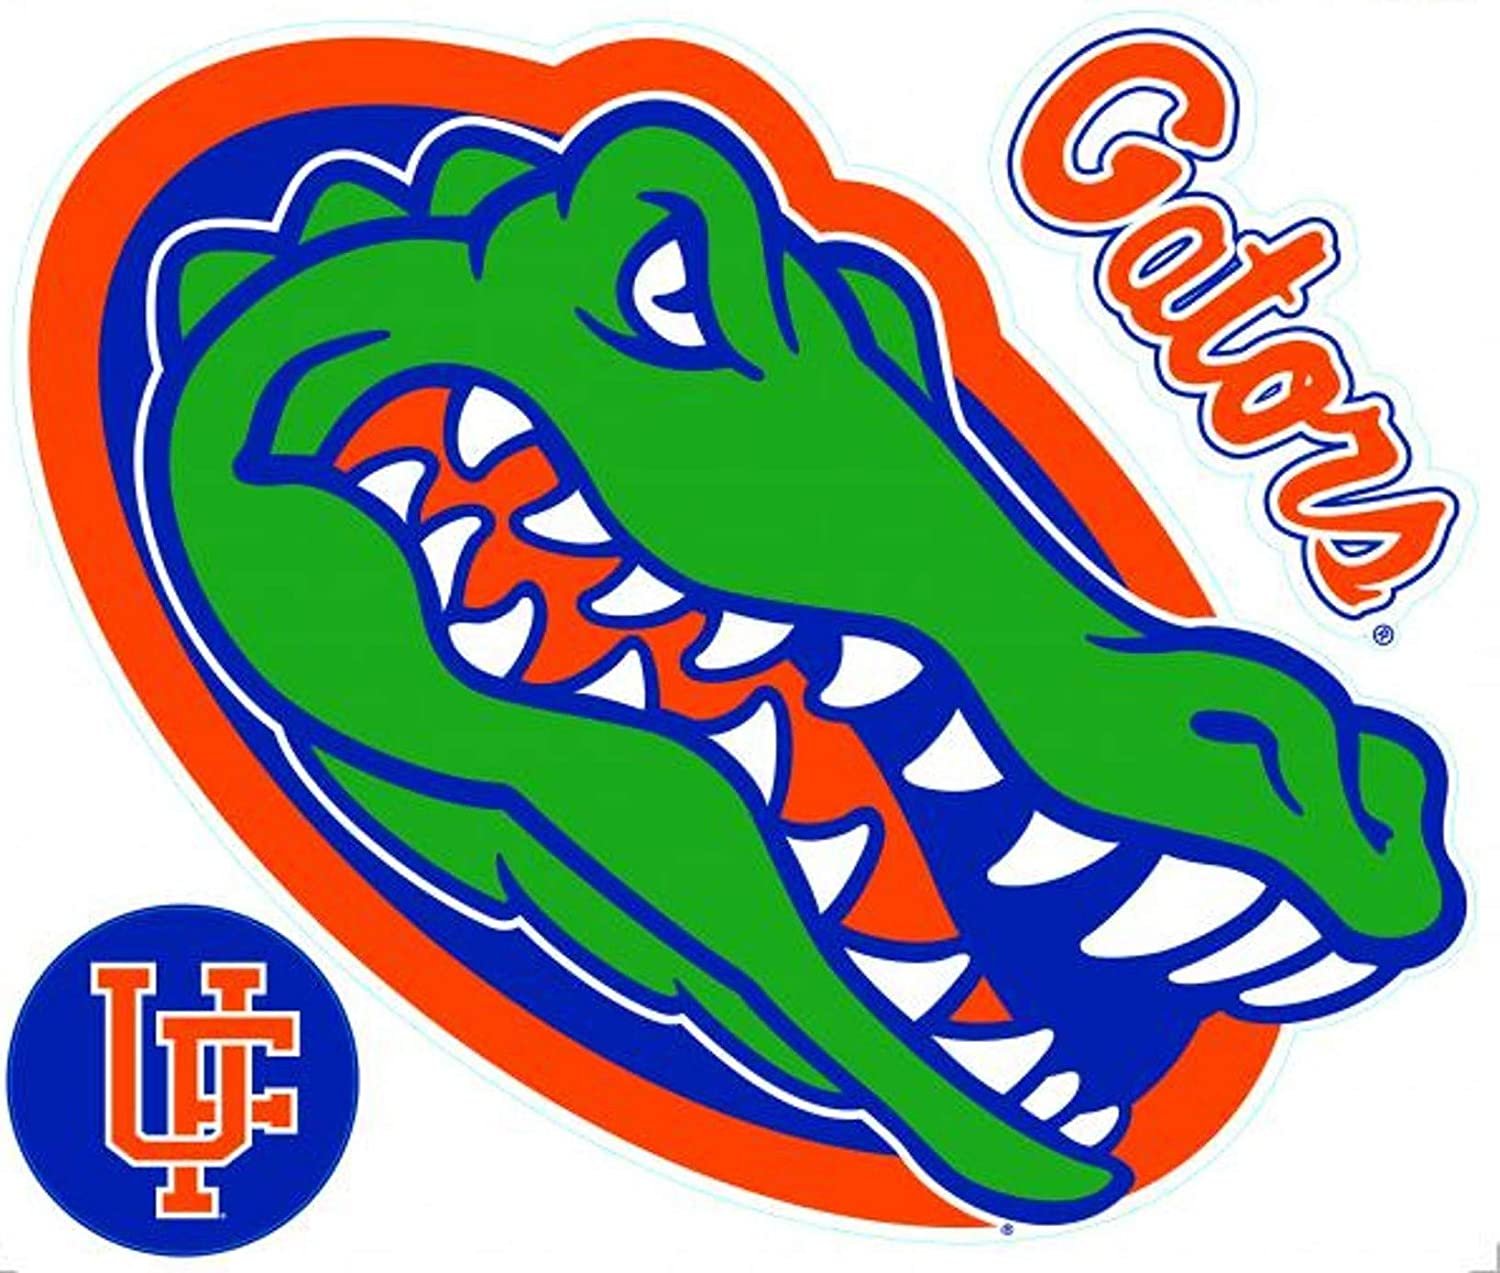 University of Florida Gators Multi Decal Sticker Sheet 8x8 Inch All Surface Full Adhesive Backing, Die Cut